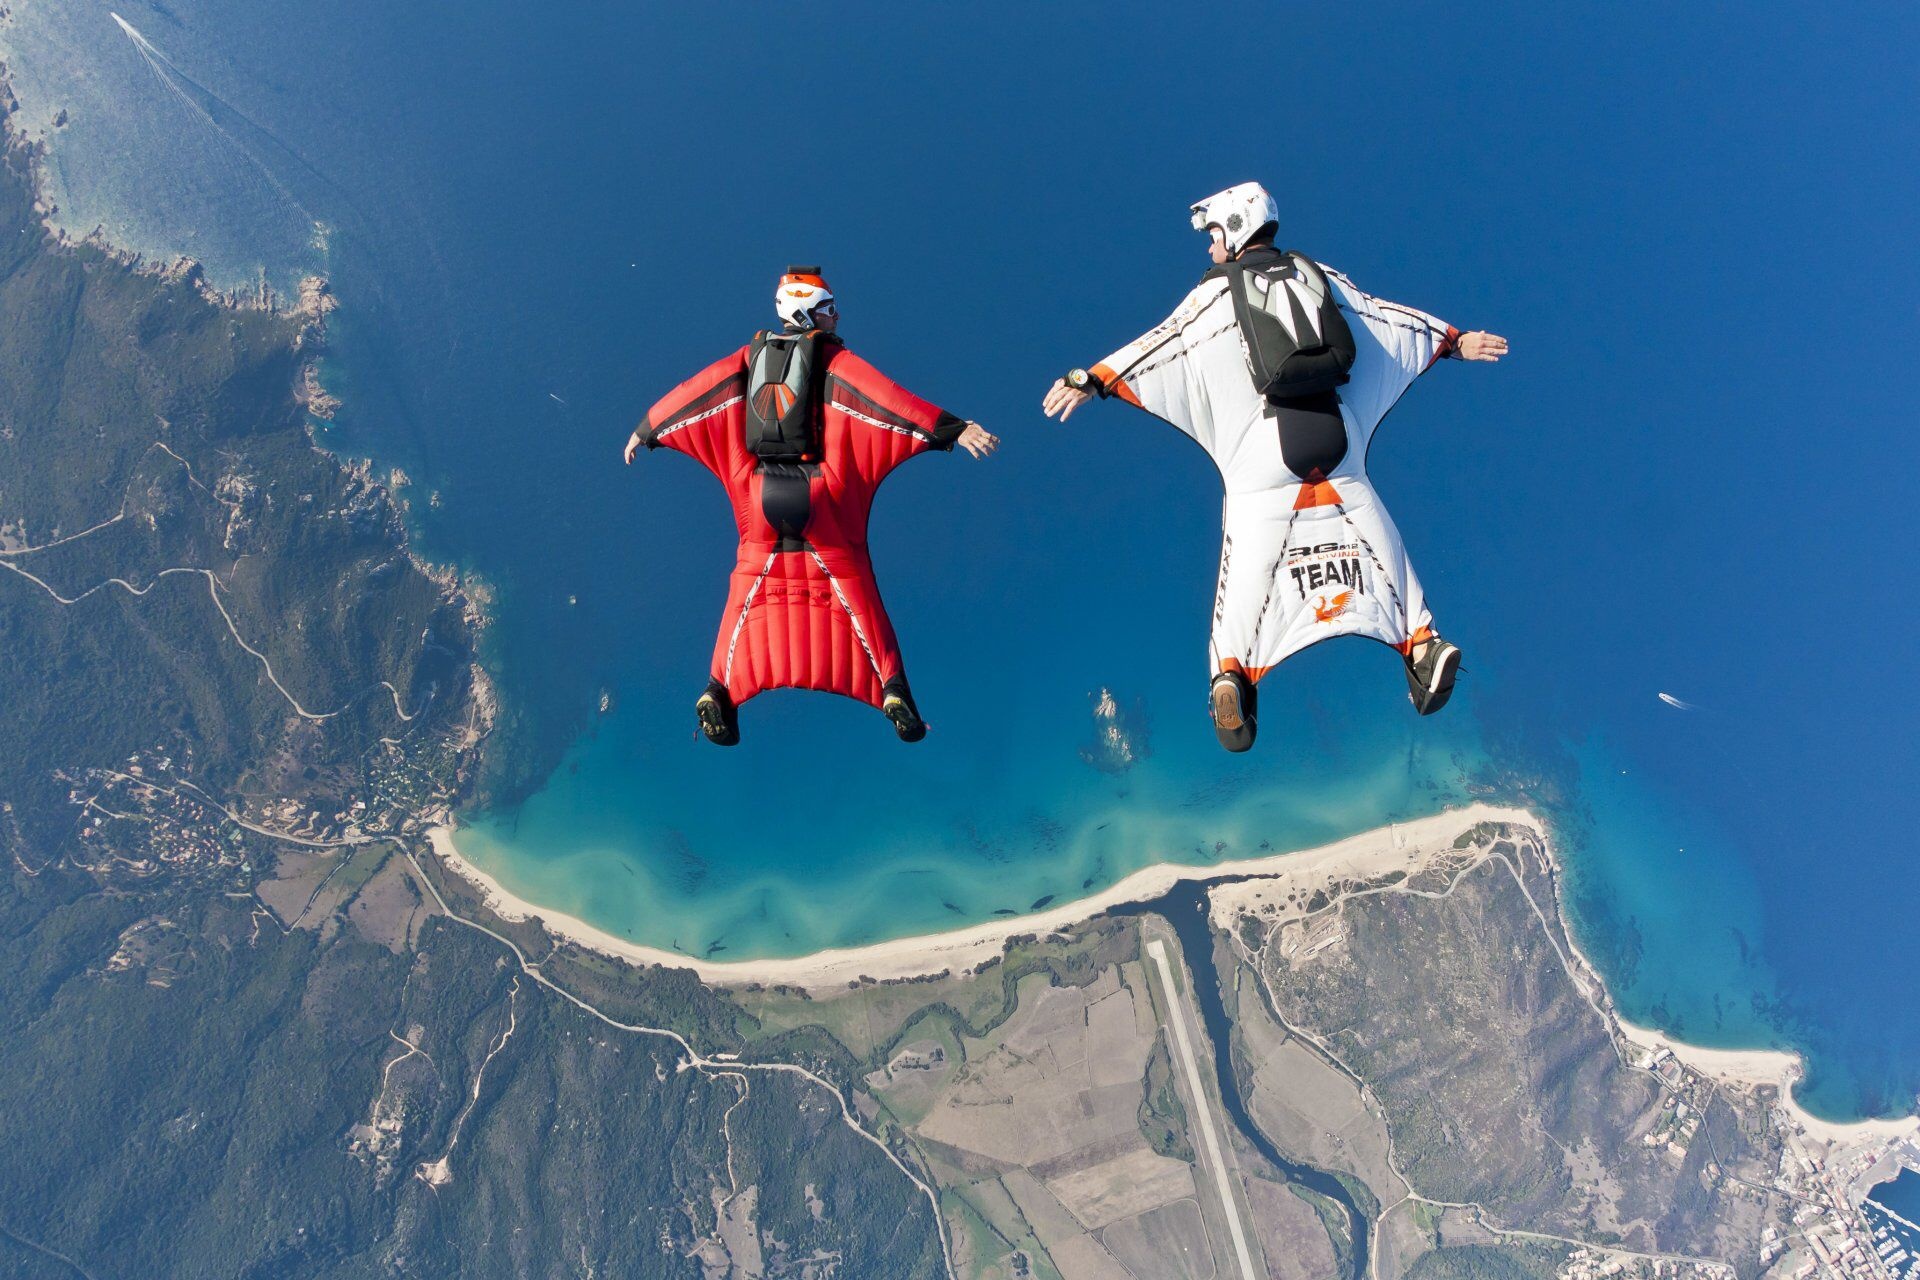 Wingsuit Flying: Wing-Suit Base Jump, Tandem wingsuiting, Extreme sports. 1920x1280 HD Wallpaper.